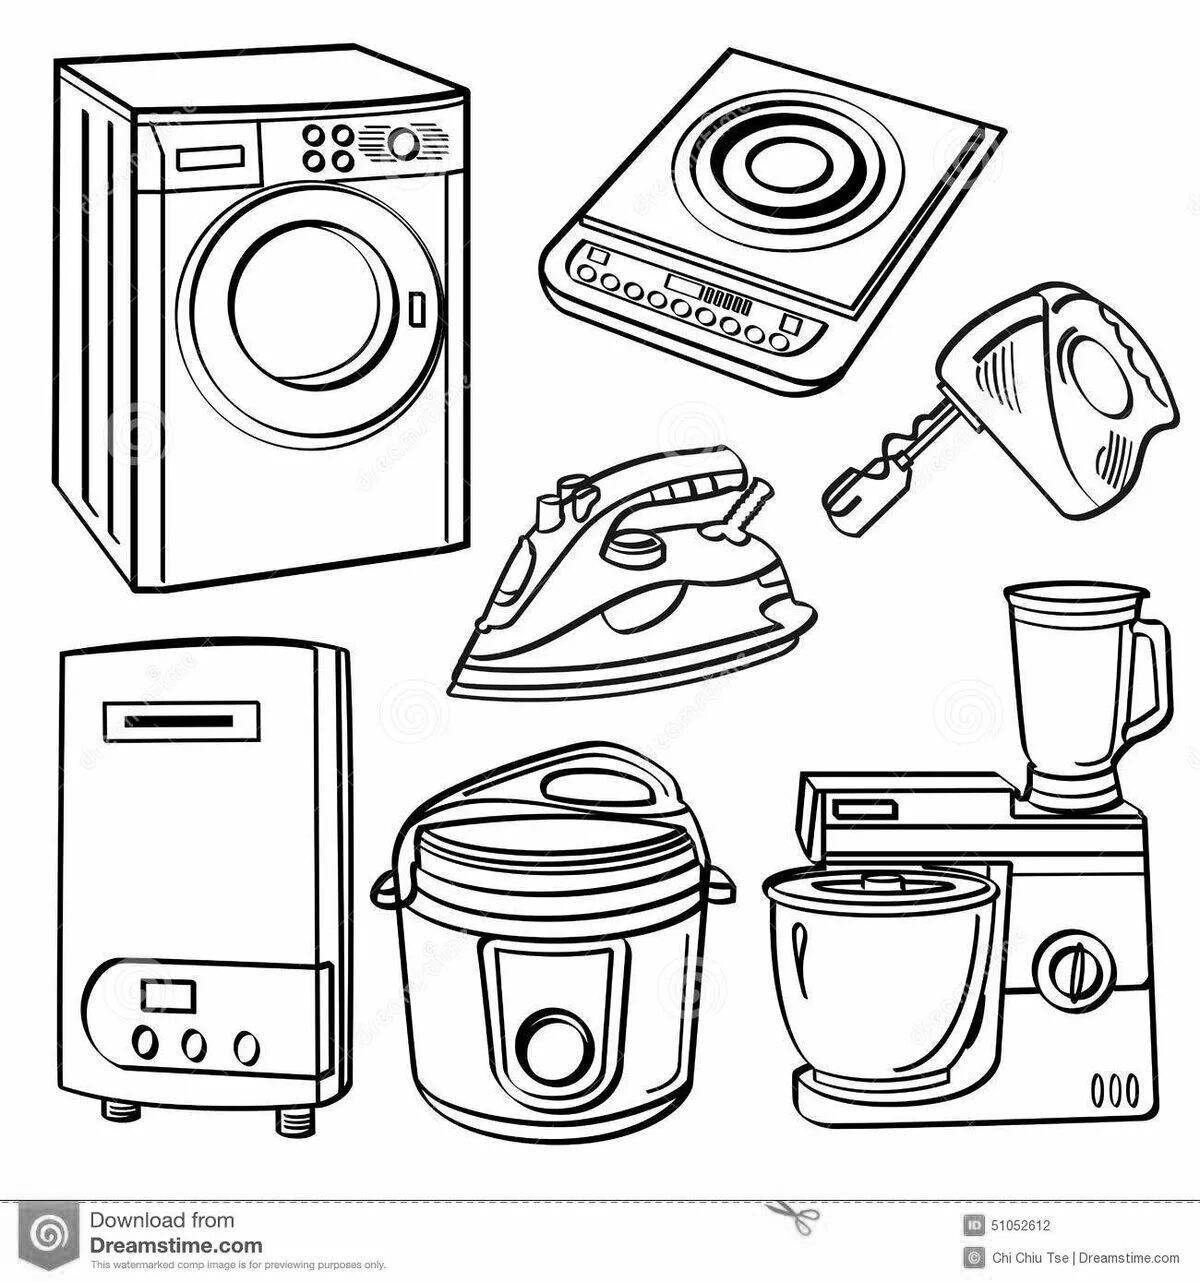 Colorful coloring pages of electrical appliances for children 5-6 years old